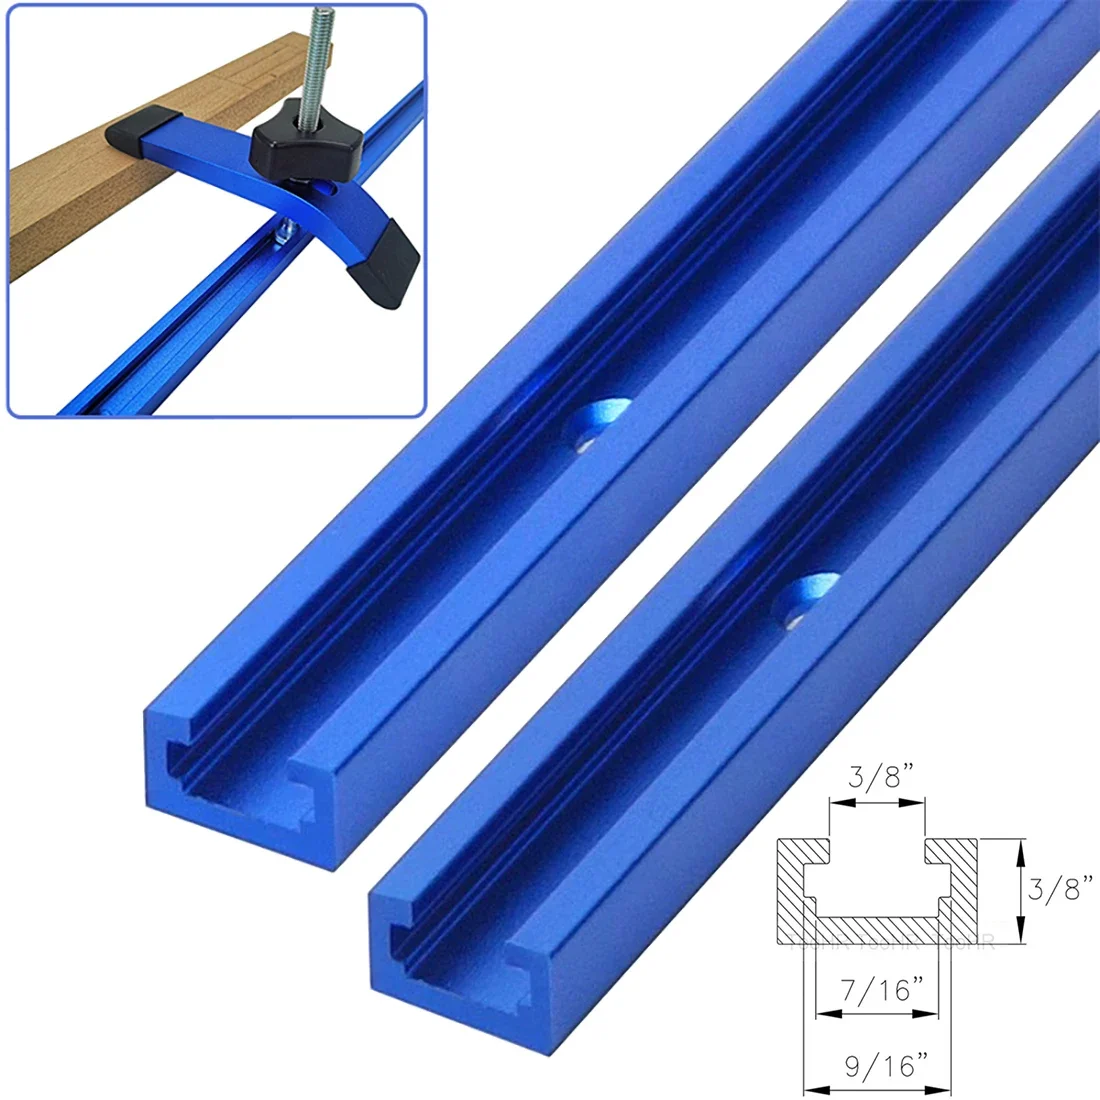 

Table Track Jig Table Rail Router T-track Tools Screw Slot Fixture Chute 19x9.5mm Saw Miter T-slot Woodworking